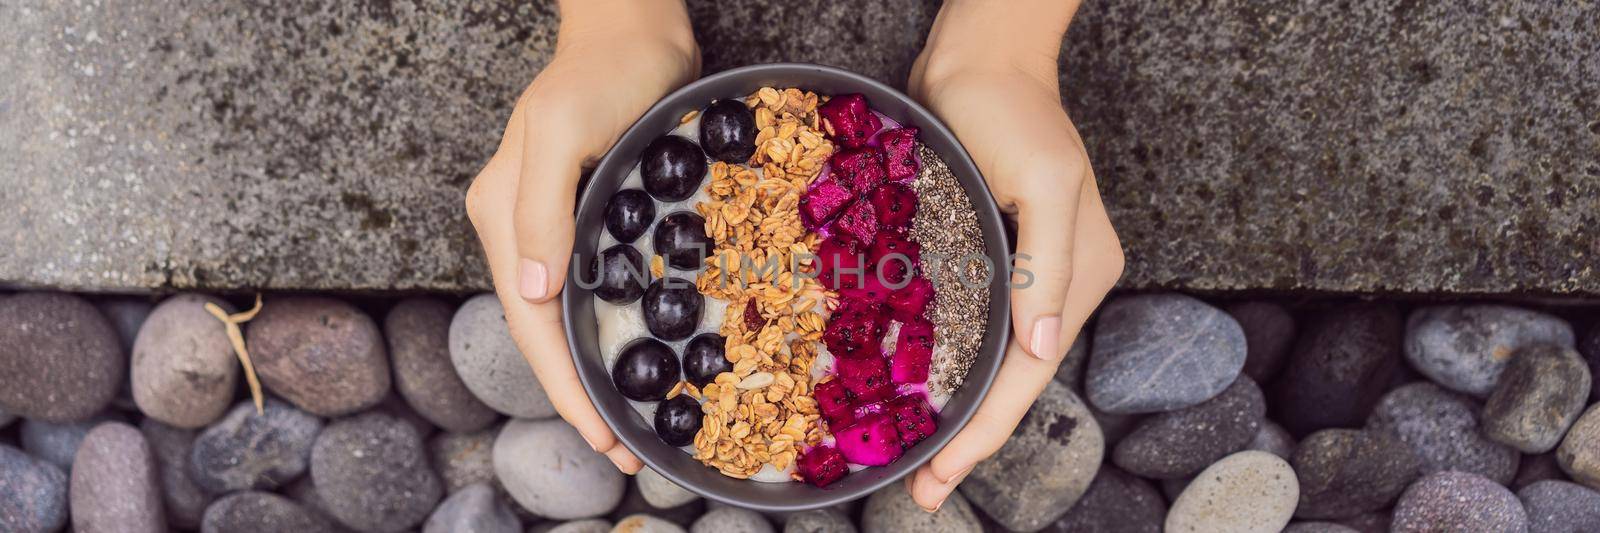 Girl relaxing and eating fruit Smoothie Bowl by the hotel pool. Exotic summer diet. Tropical beach lifestyle. BANNER, LONG FORMAT